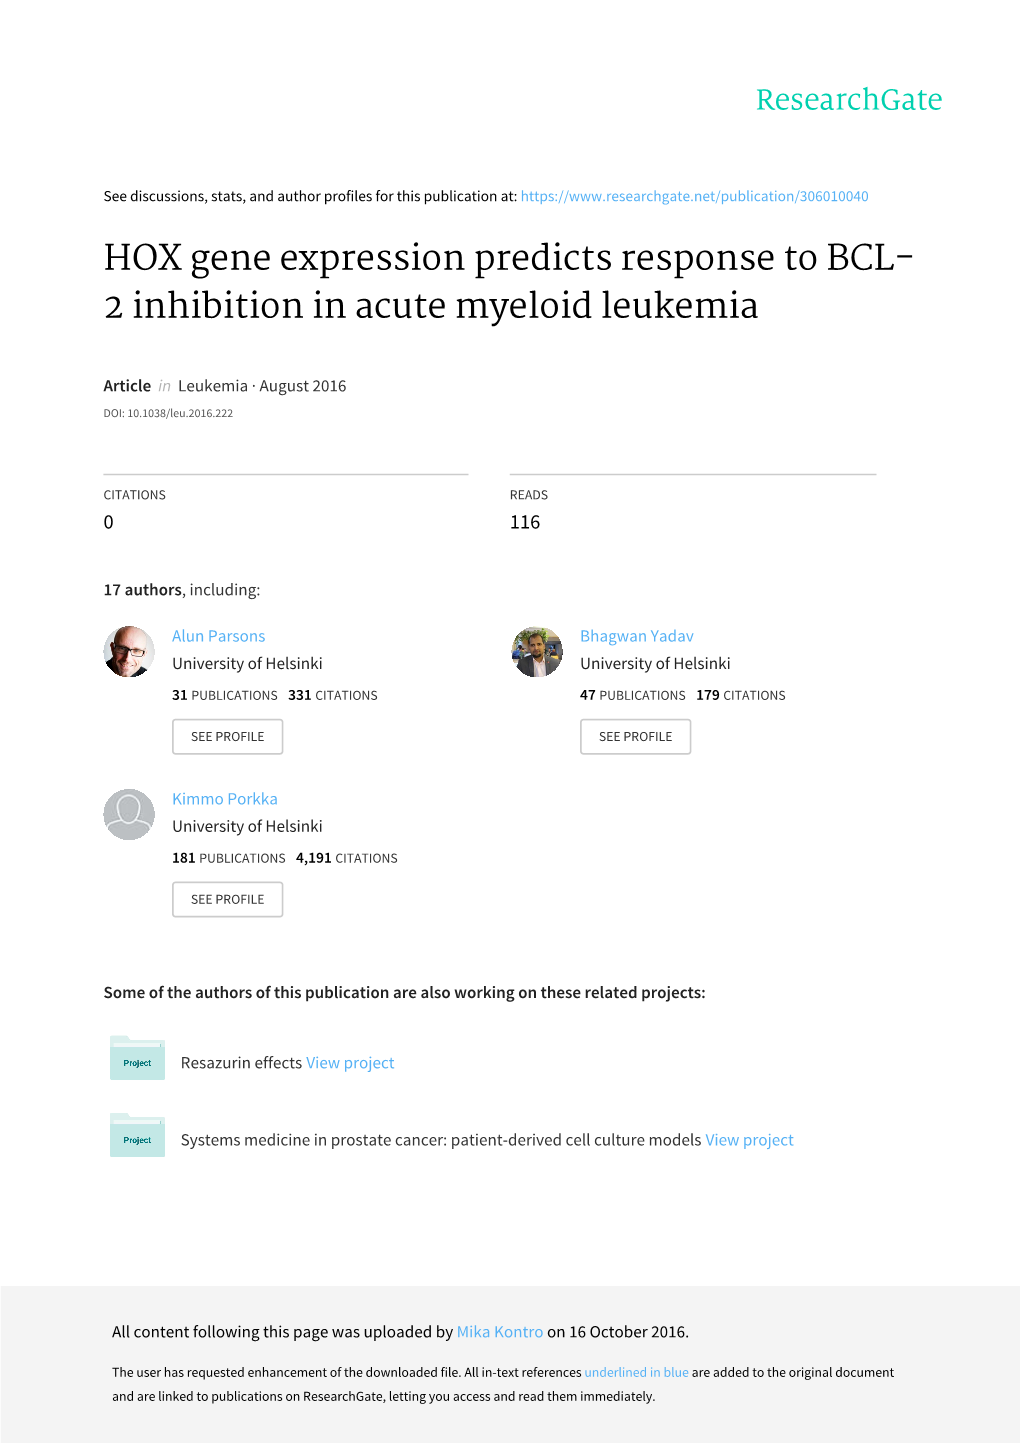 HOX Gene Expression Predicts Response to BCL-2 Inhibition in Acute Myeloid Leukemia